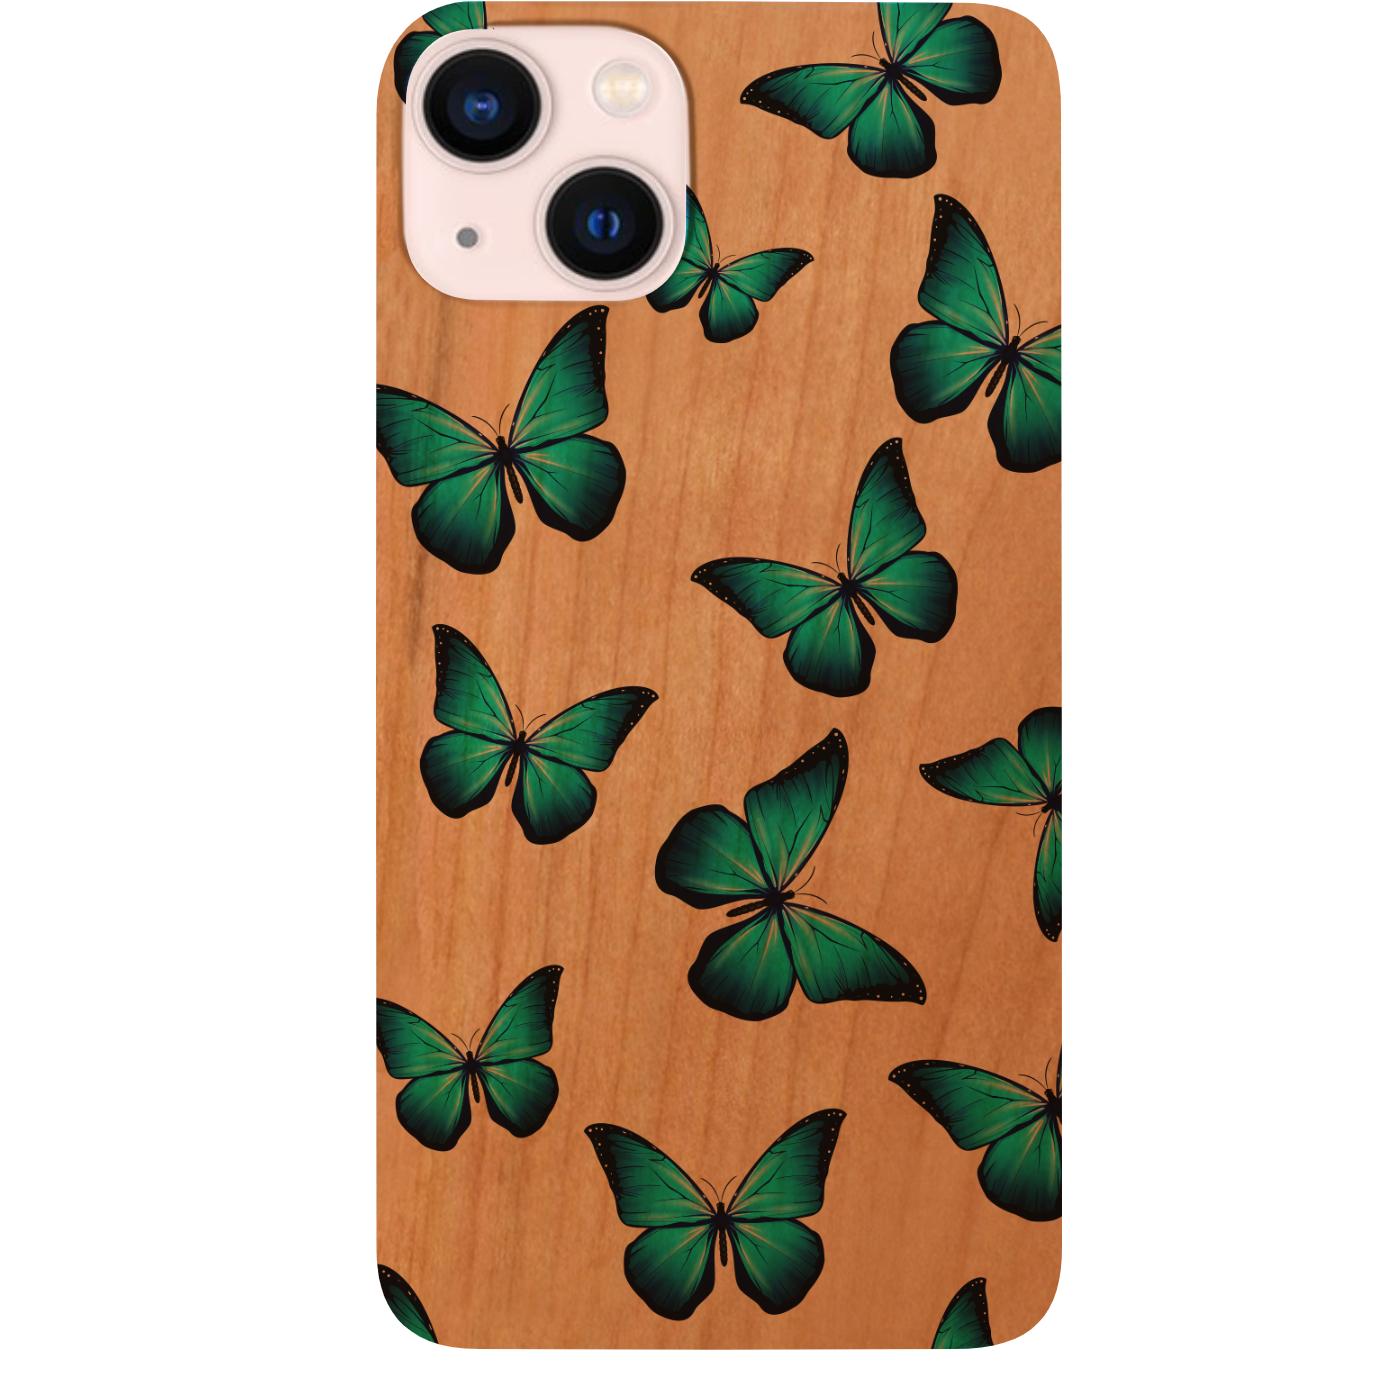 Cute Butterfly Pattern Soft Phone Case With Wireless Charging For